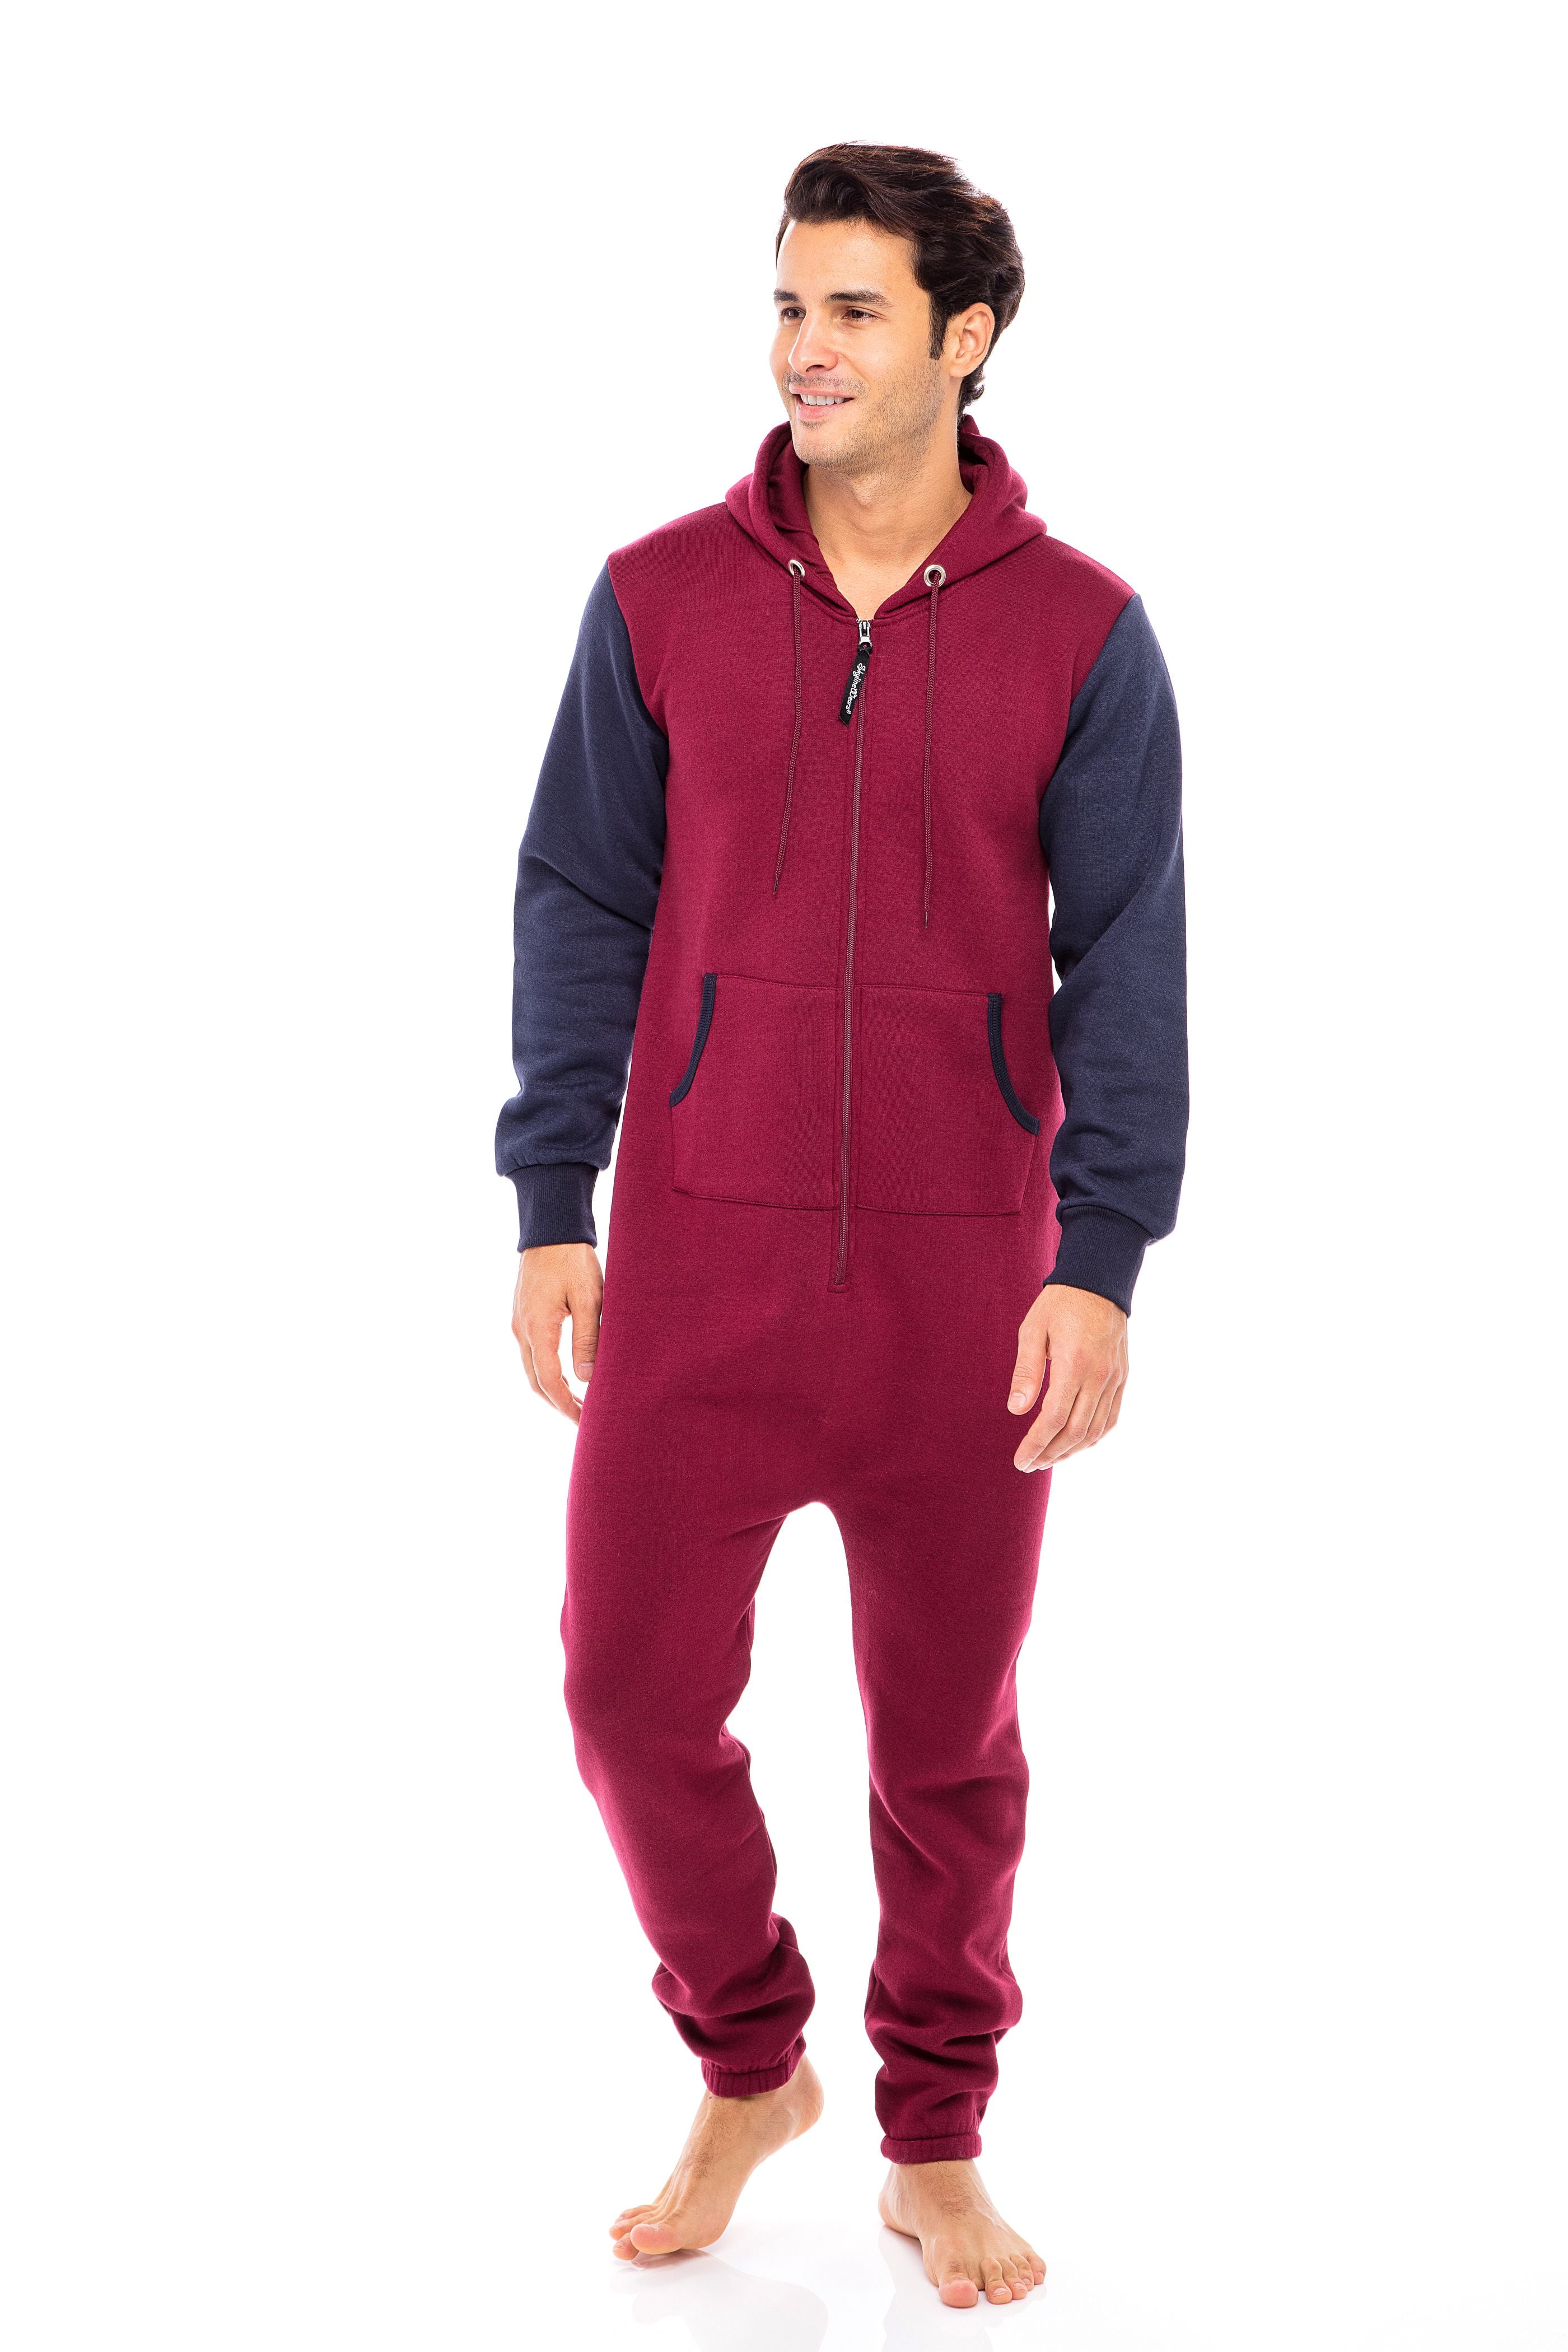 Men's Jumpsuits Adult Onesies One Piece Non Footed Pajama Unisex Playsuits 